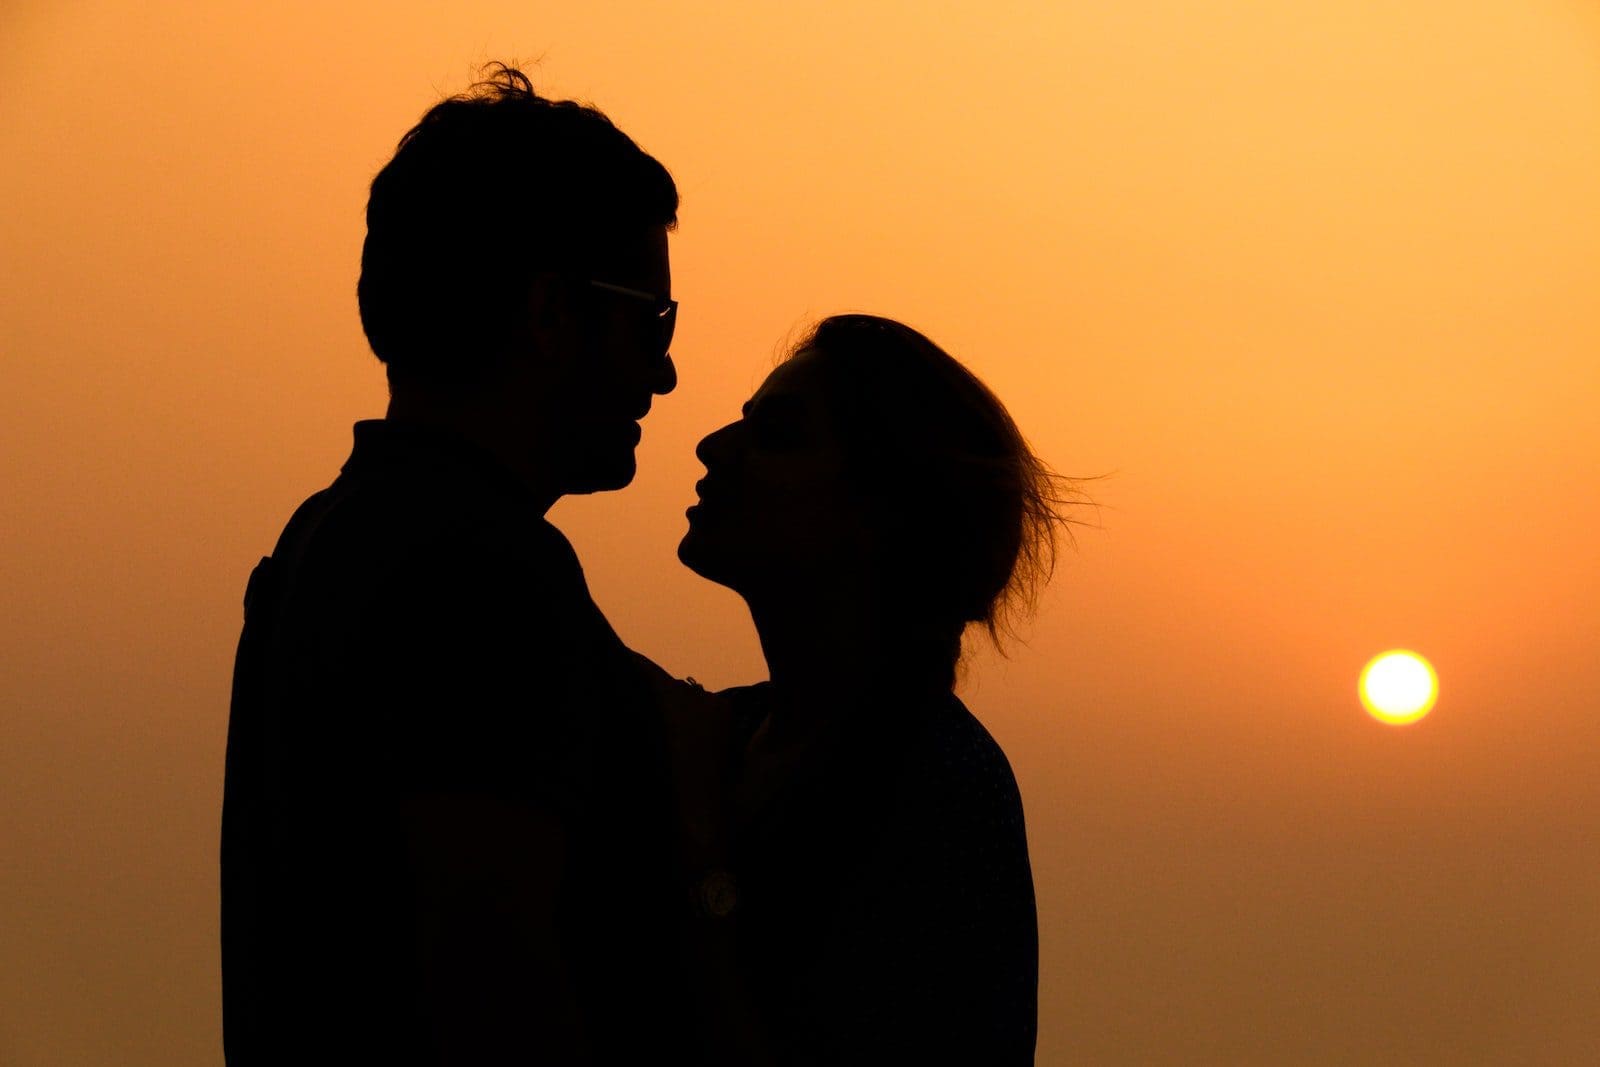 dating silhouette of woman wearing sunglasses during sunset